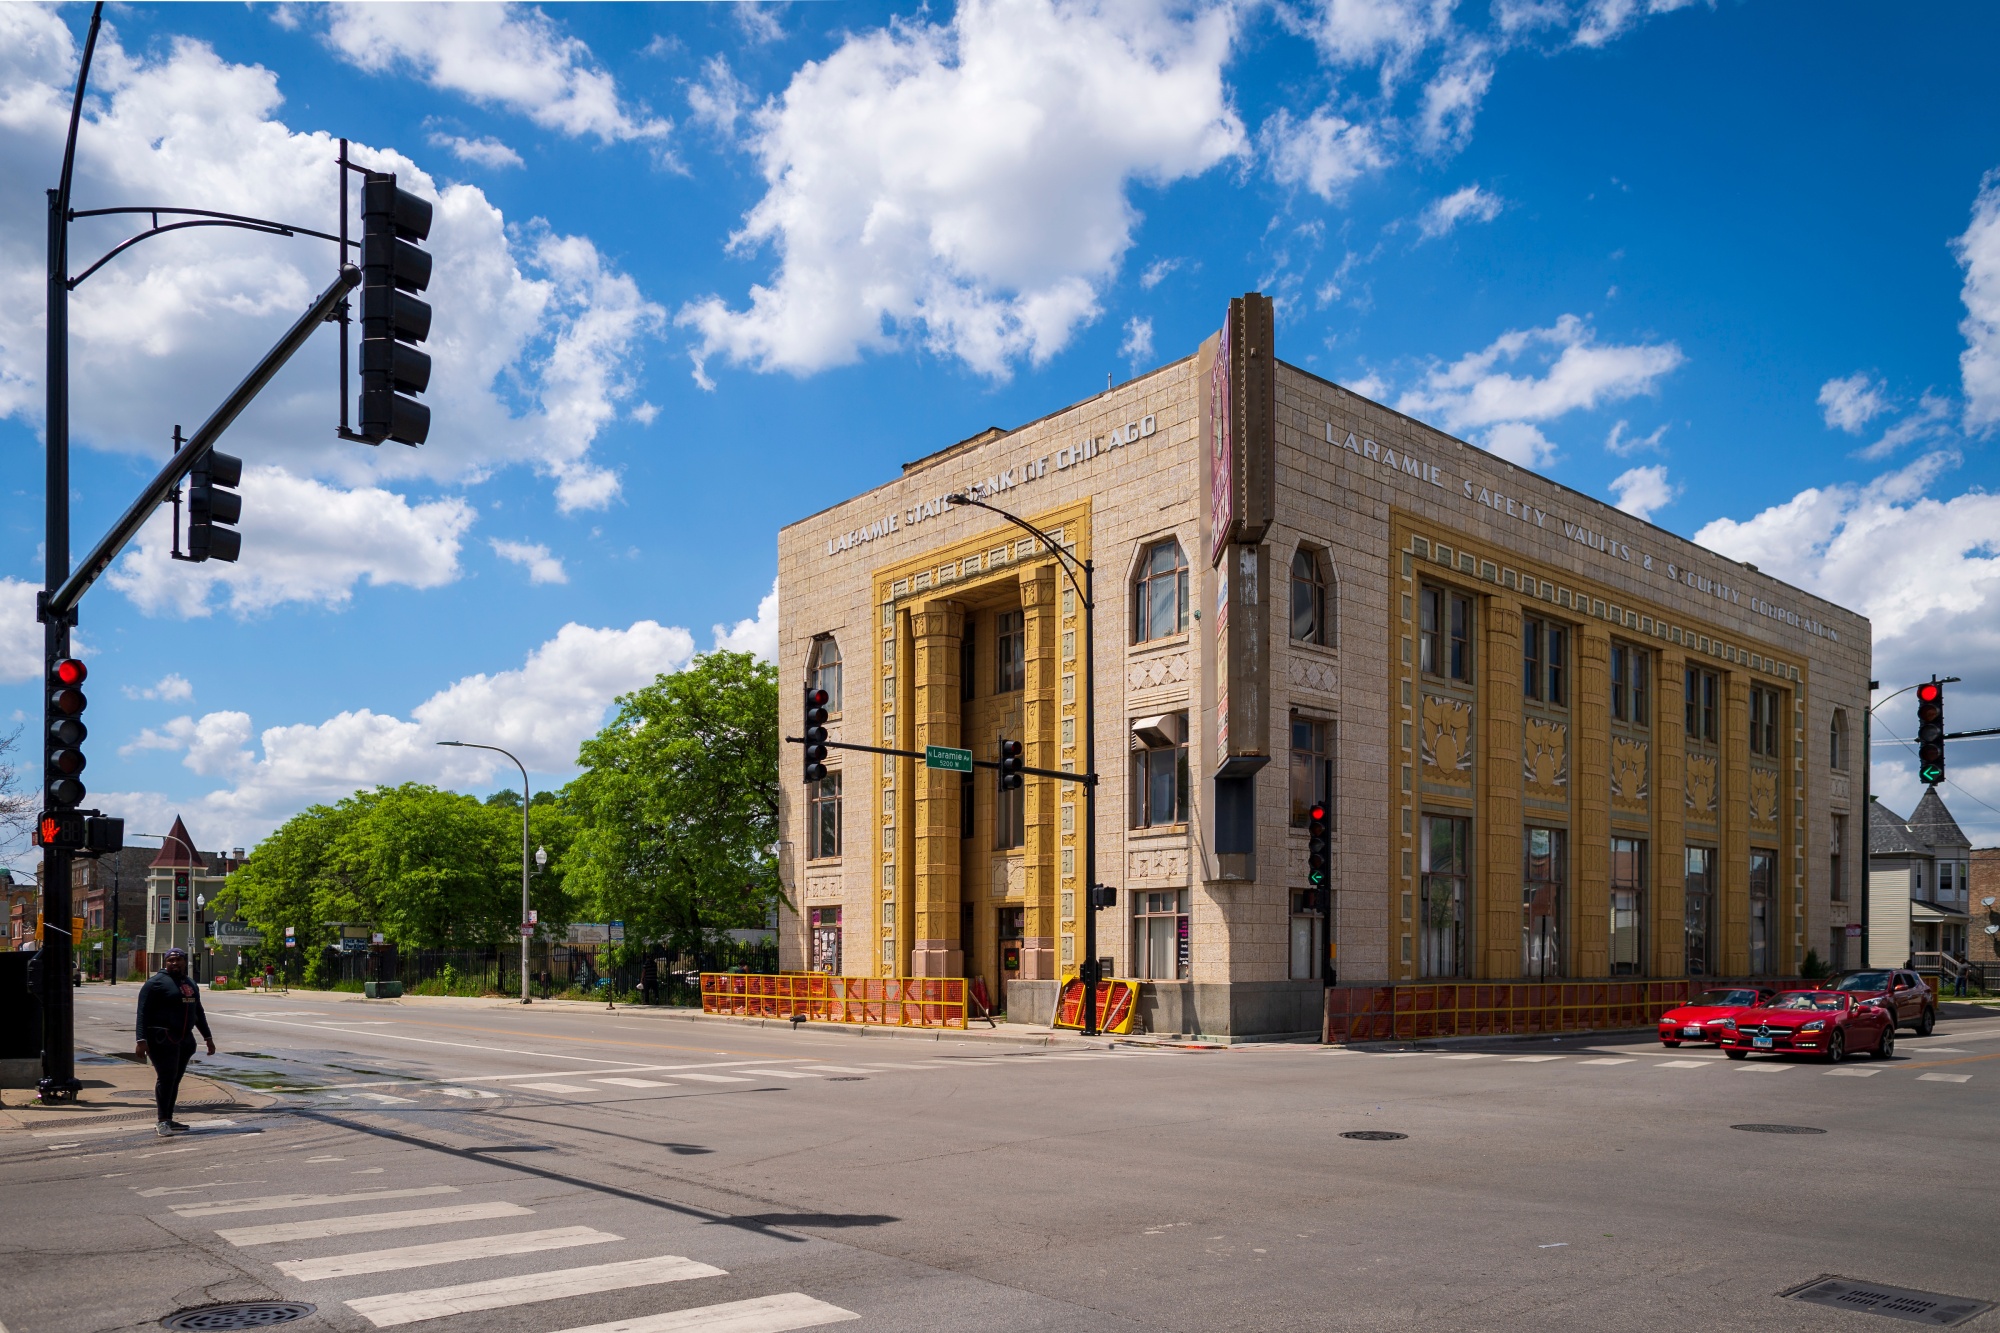 Replacing Parking with People: The Next Wave of Adaptive Reuse